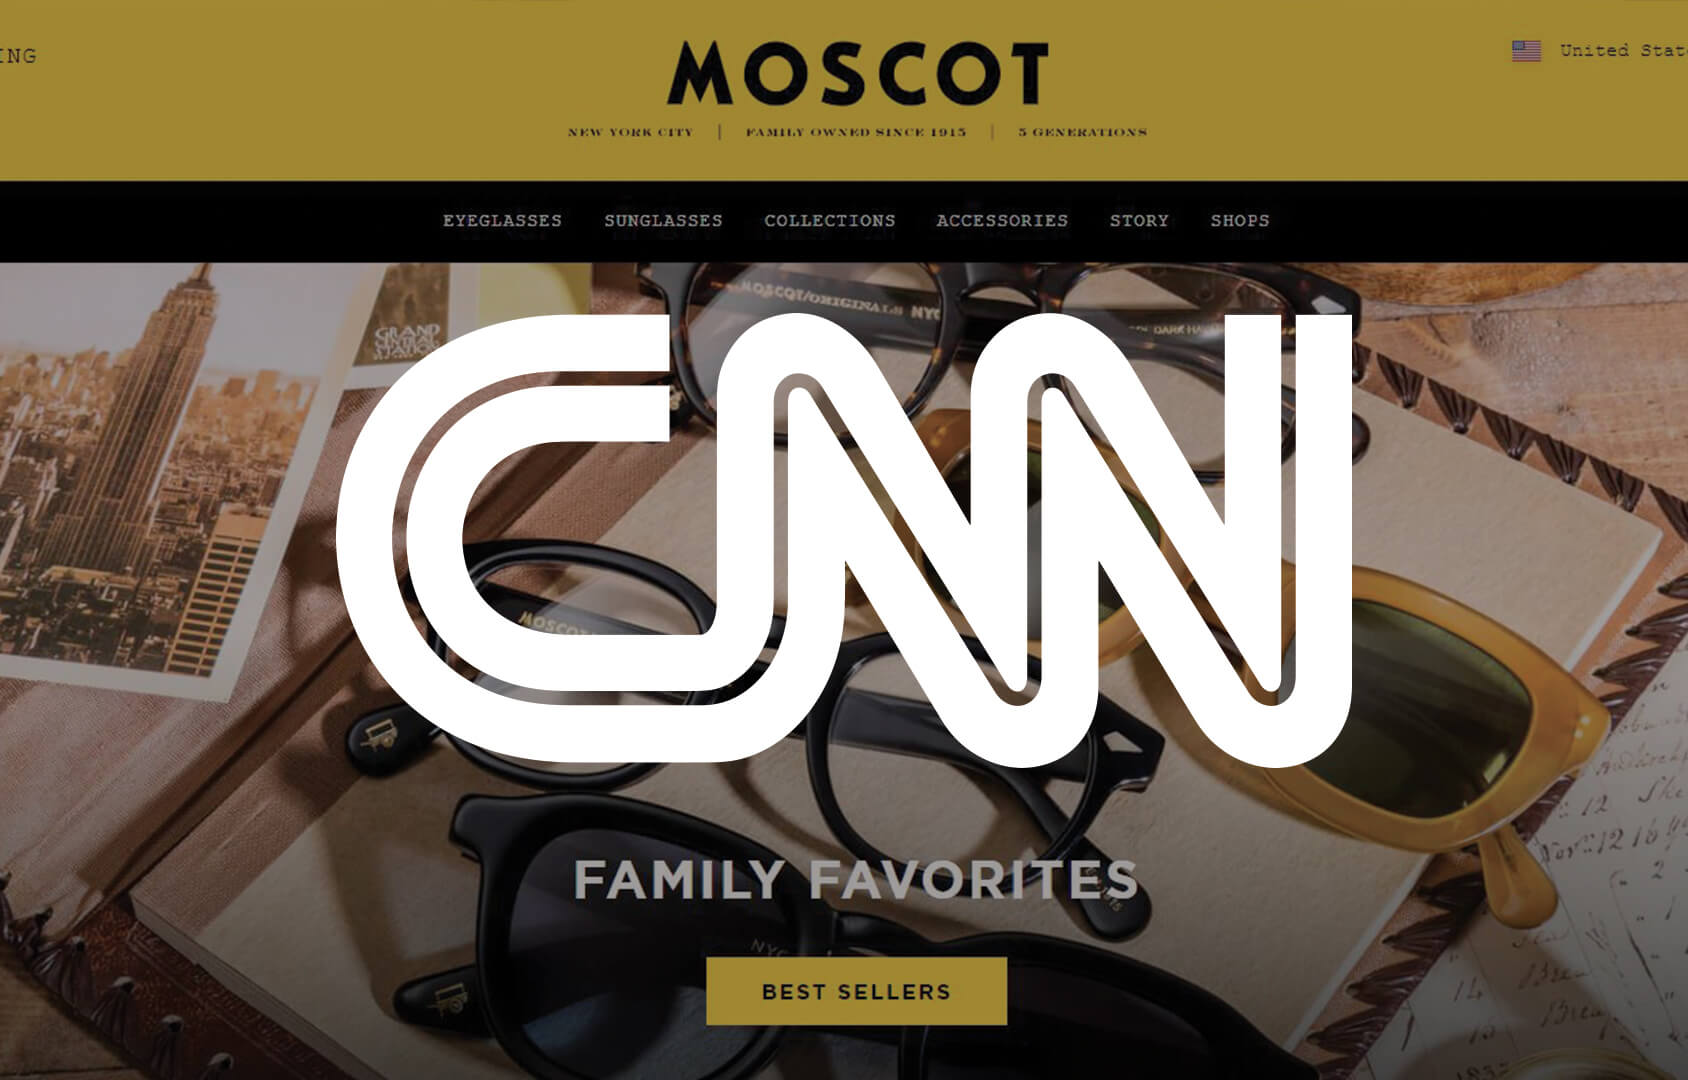 Where to Buy The Best Glasses Online? CNN points to MOSCOT